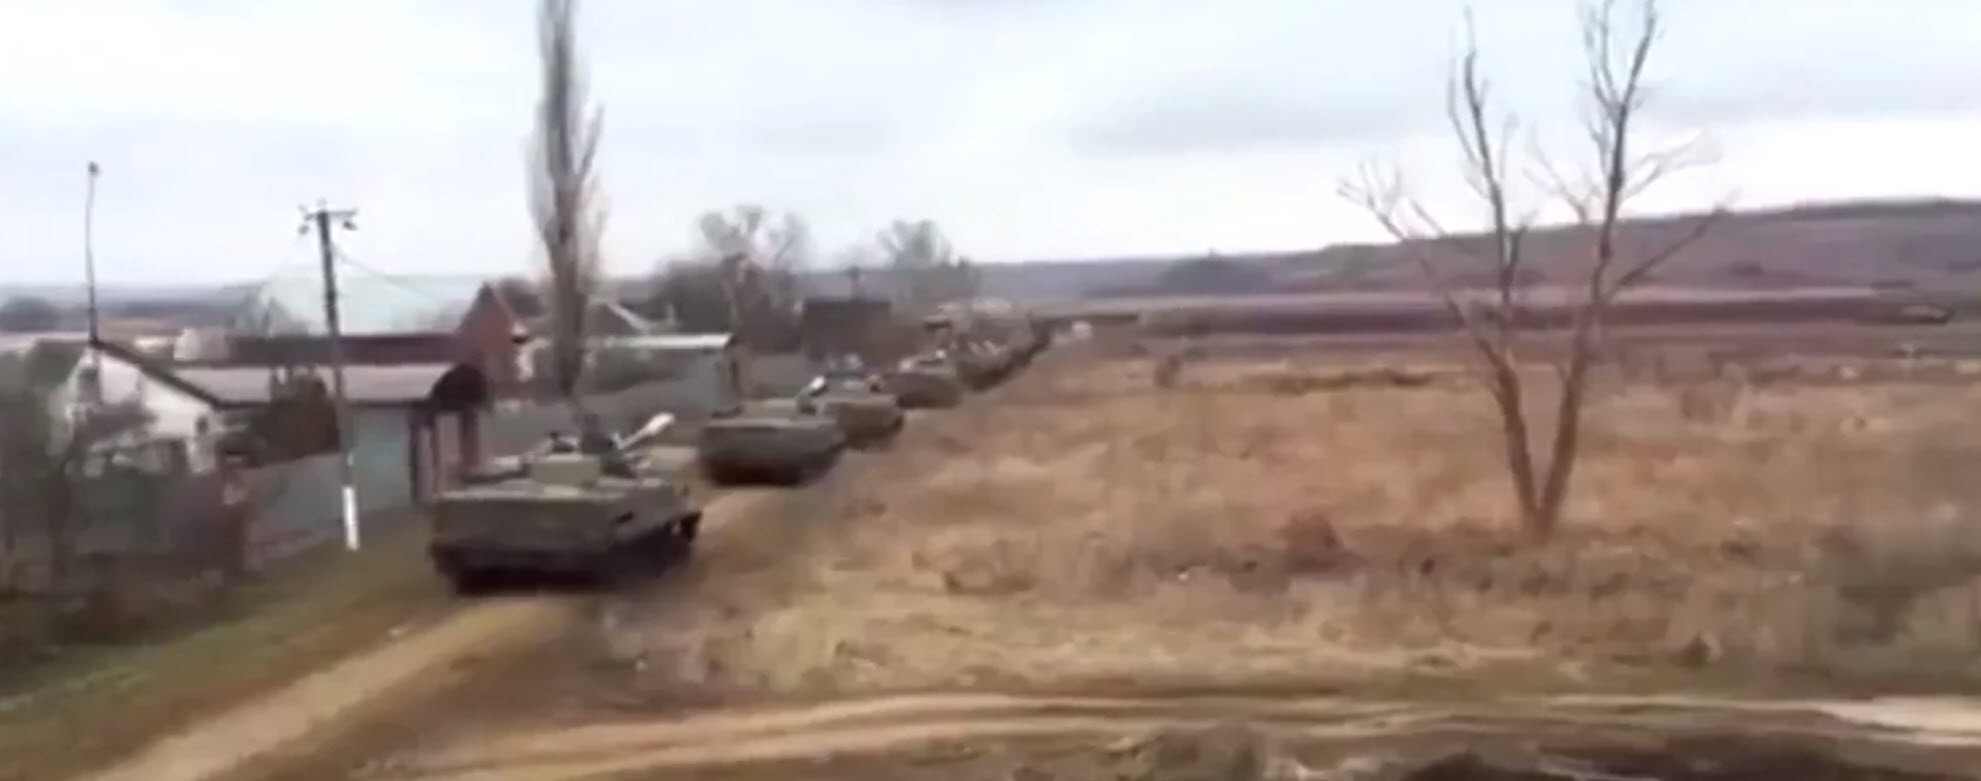 #MinskMonitor: Russian Fighting Vehicles Appear at Border?